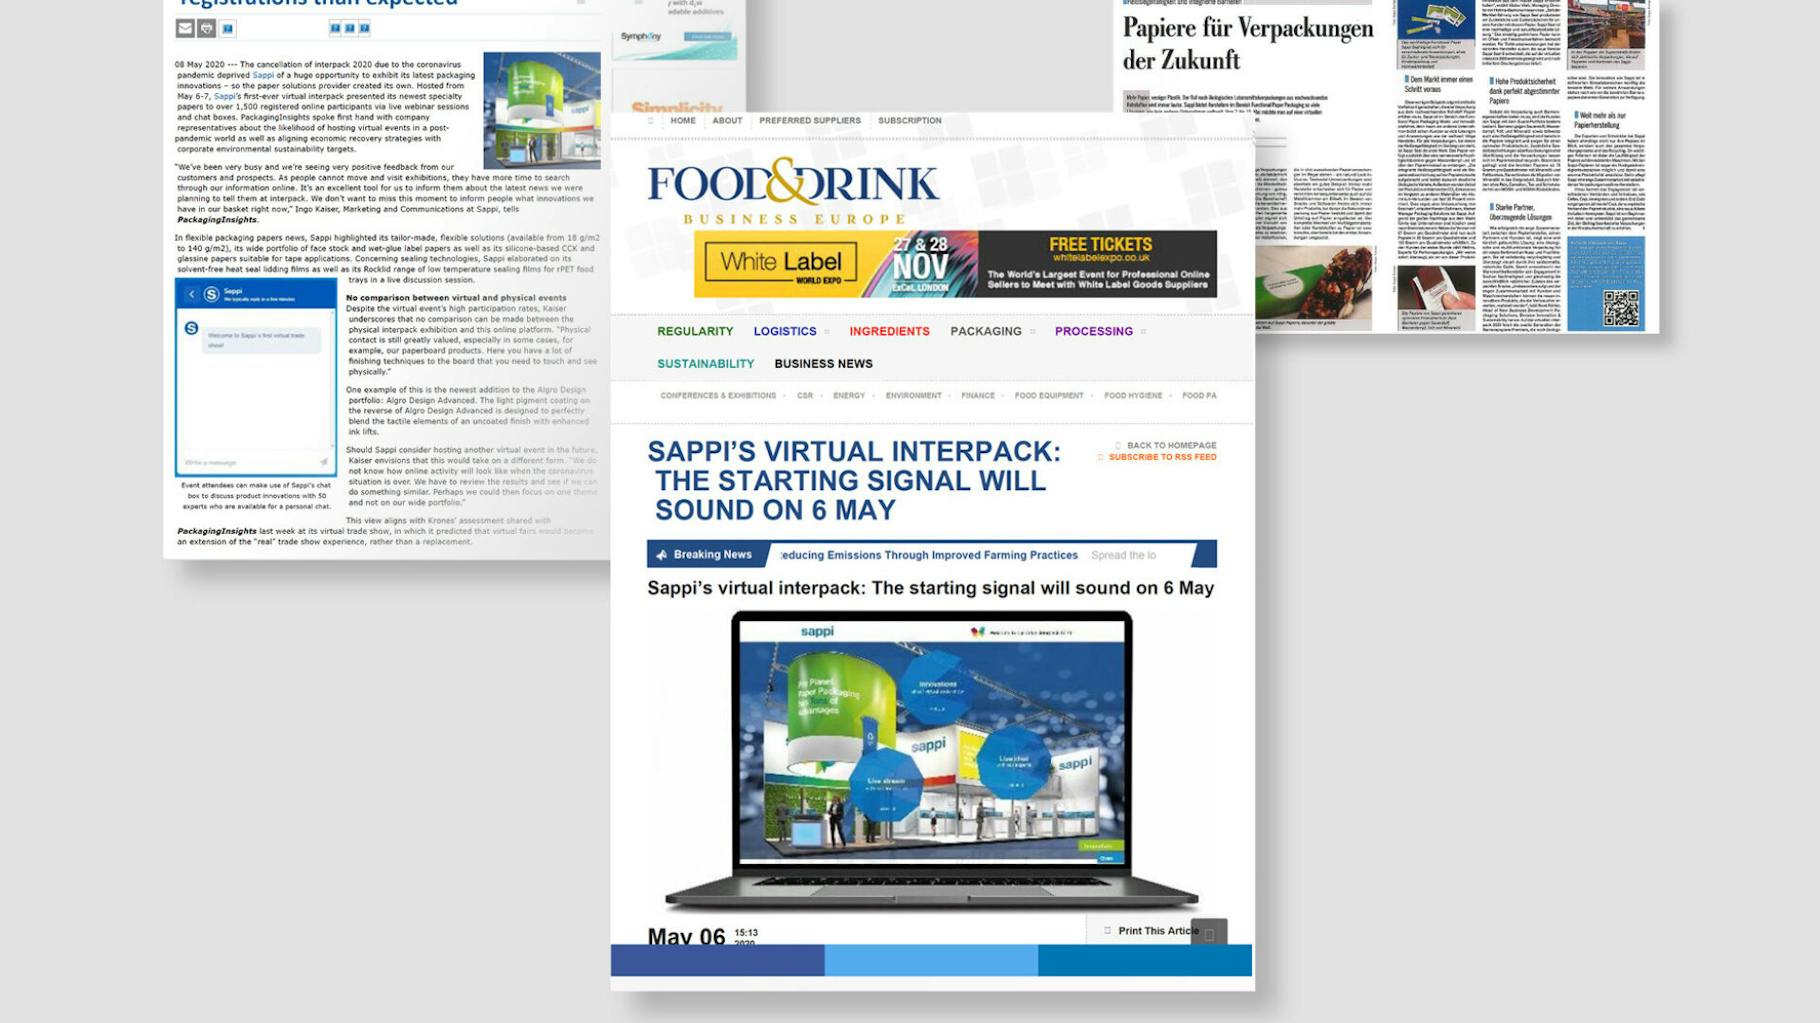 Two screenshots of a website and a scan of a magazine on the subject of virtual trade fairs are shown.